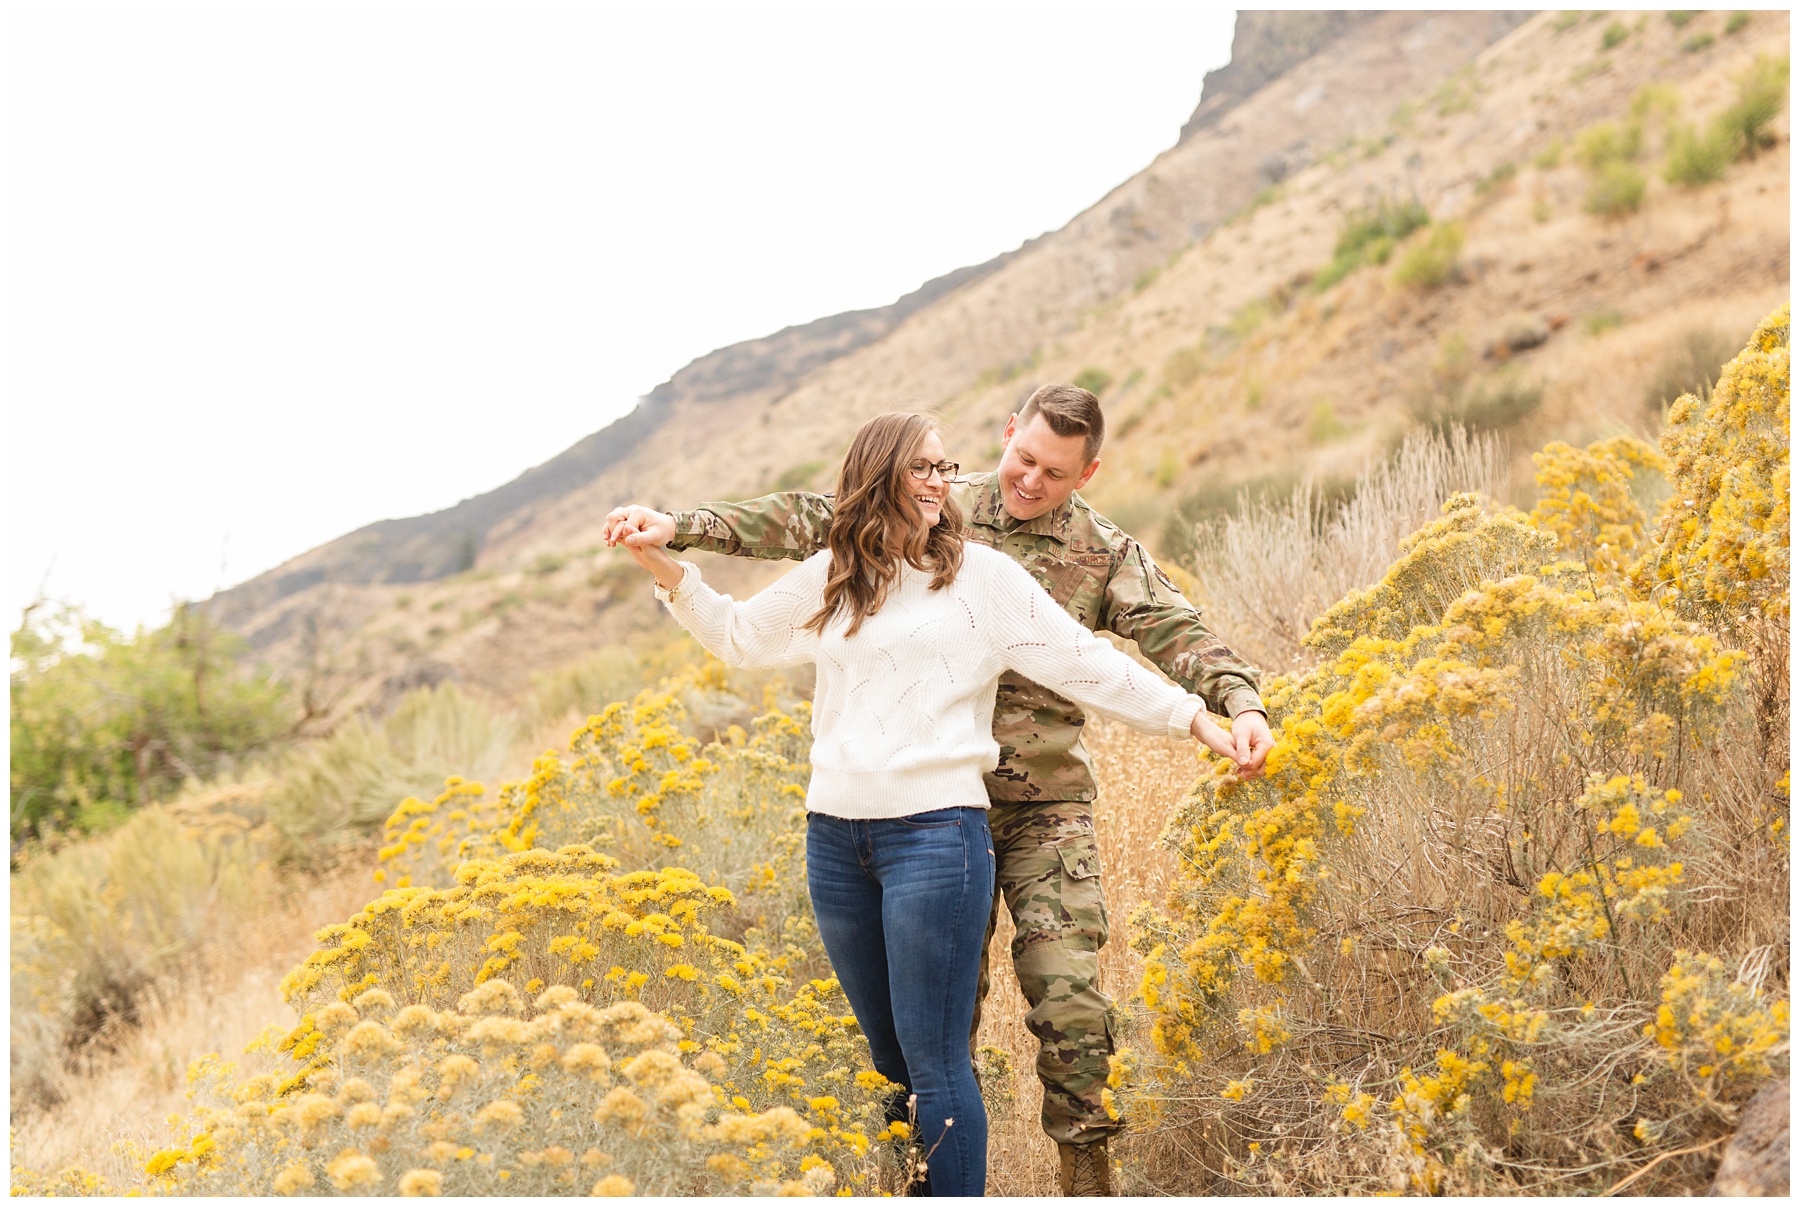 couple pretending to be an airplane in Boise Idaho for their photo session. man in military camo surrounded by mustard bushes